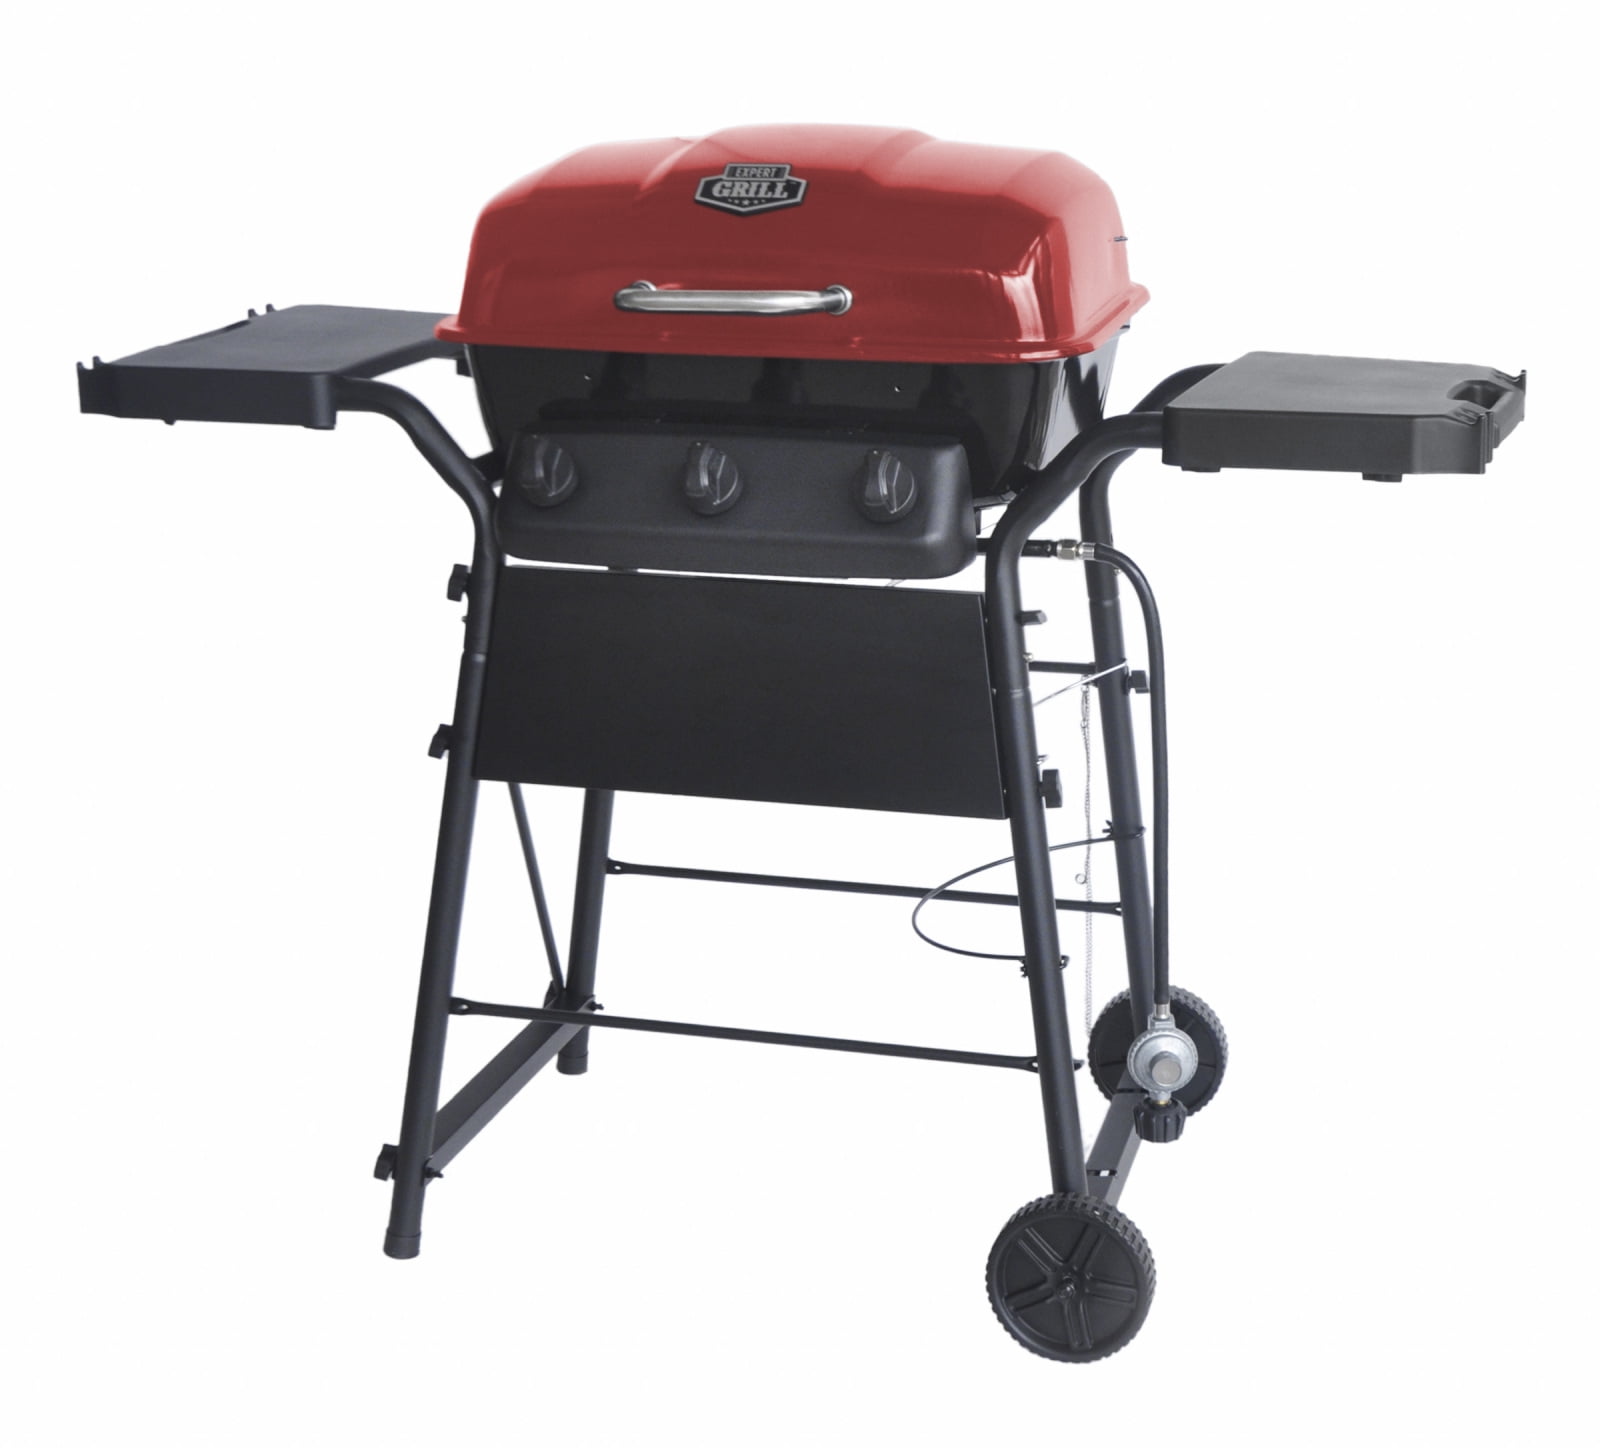 Expert Grill 3 Burner 30,000 BTU Gas Grill with Side ...